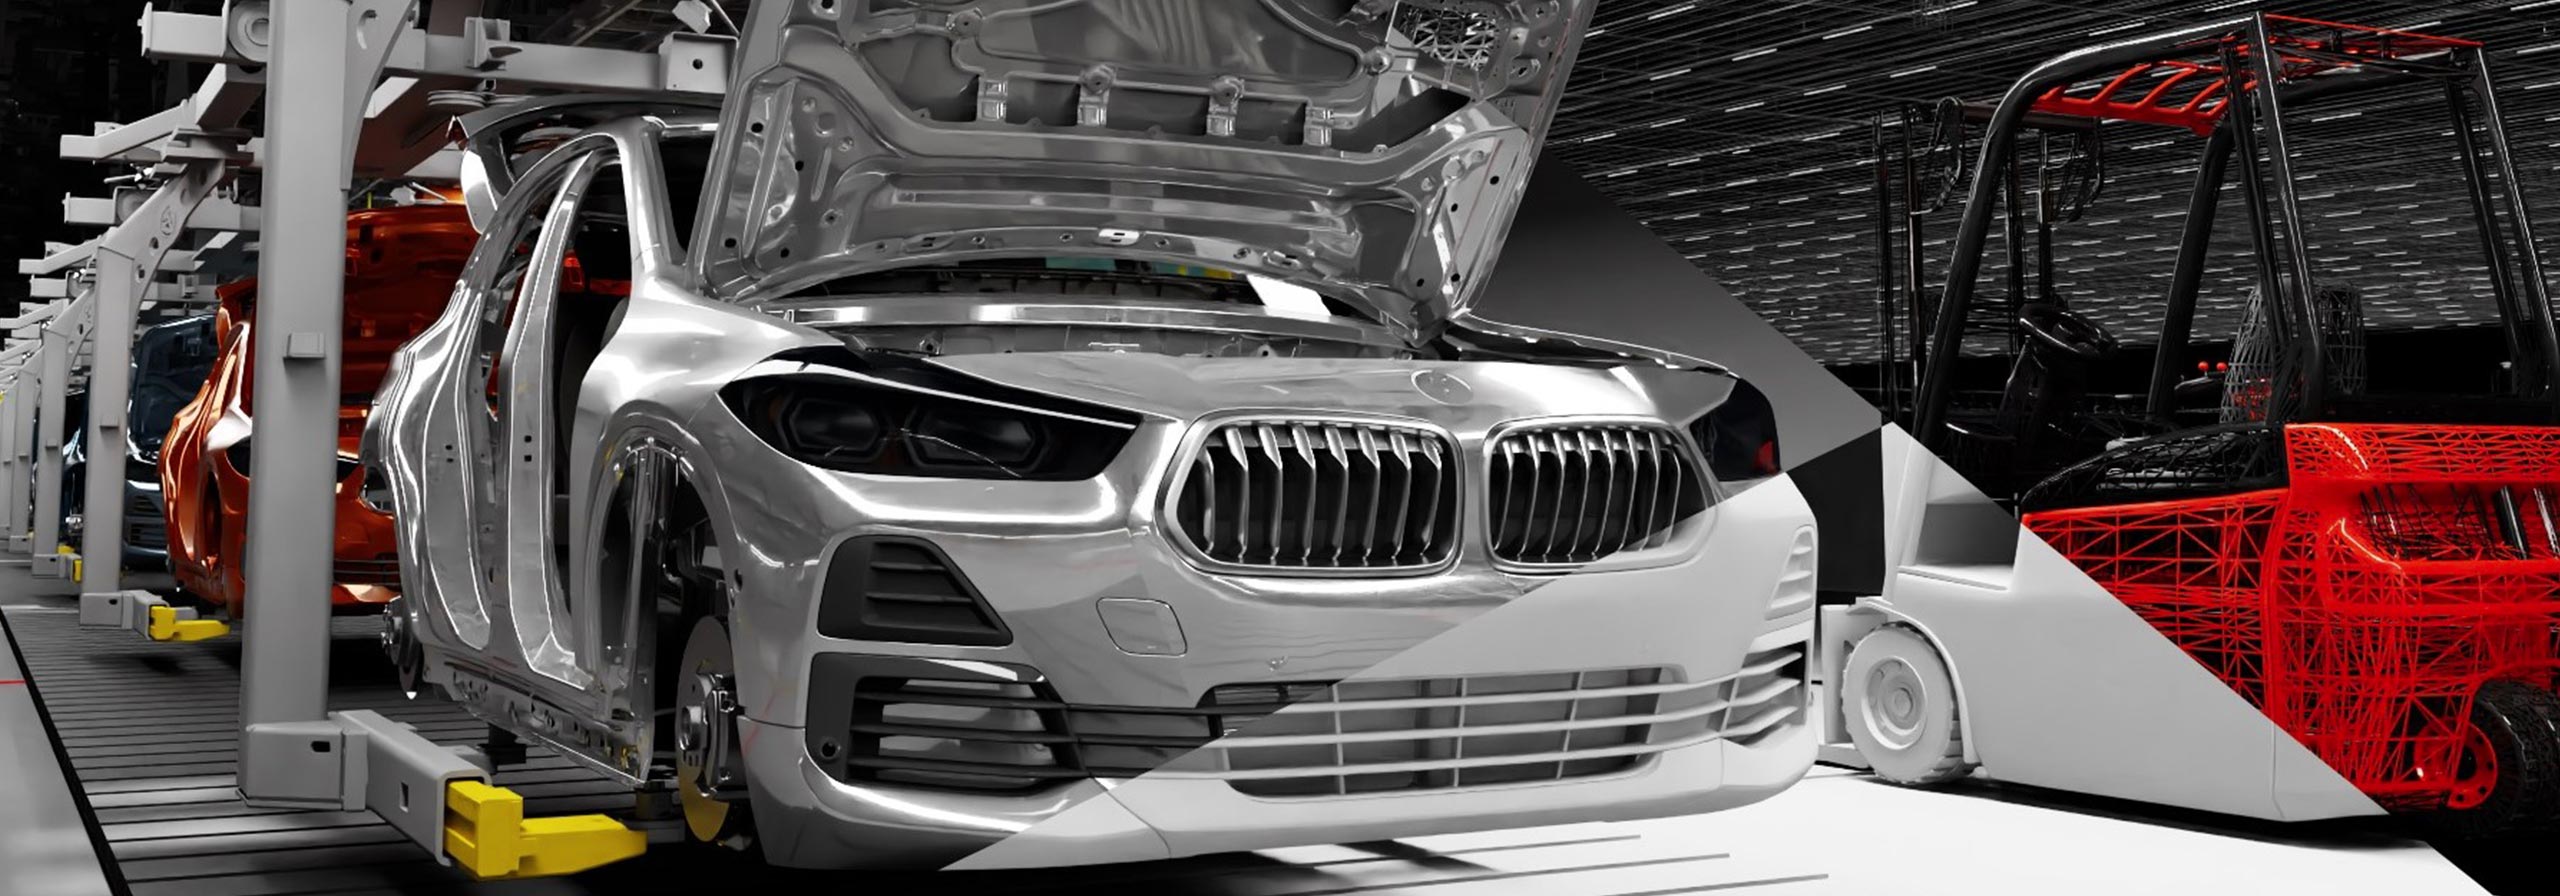 Where are BMW cars made?